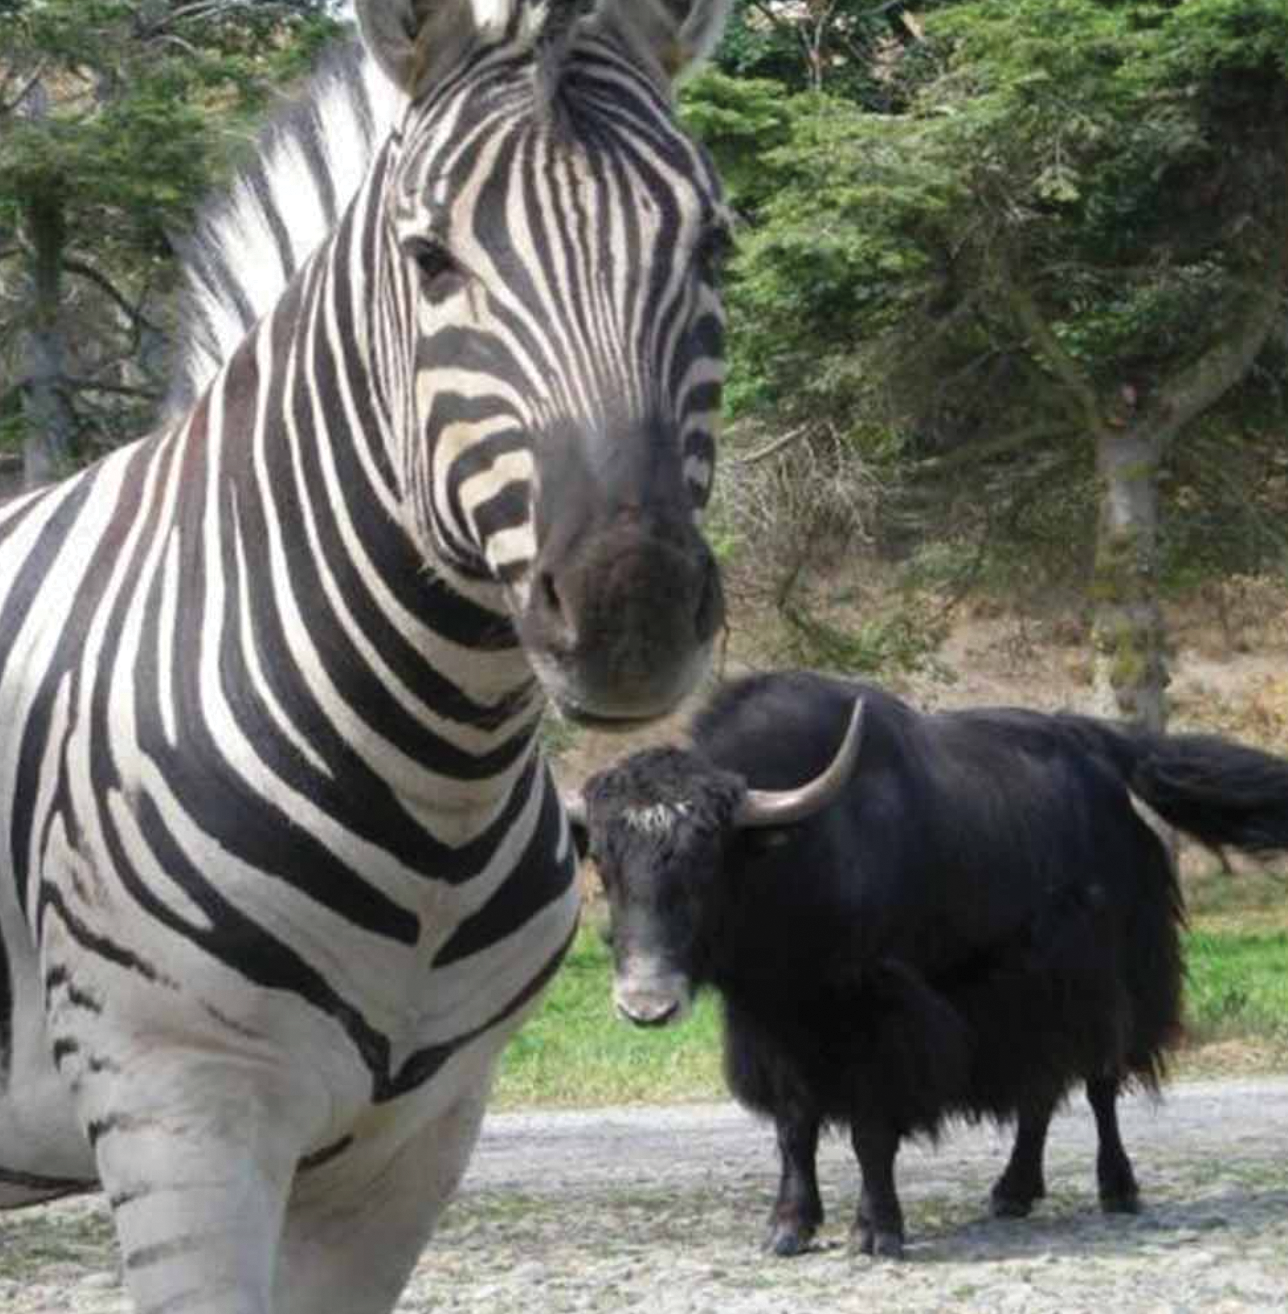 "A zebra and buffalo at Olympic Game Farm"